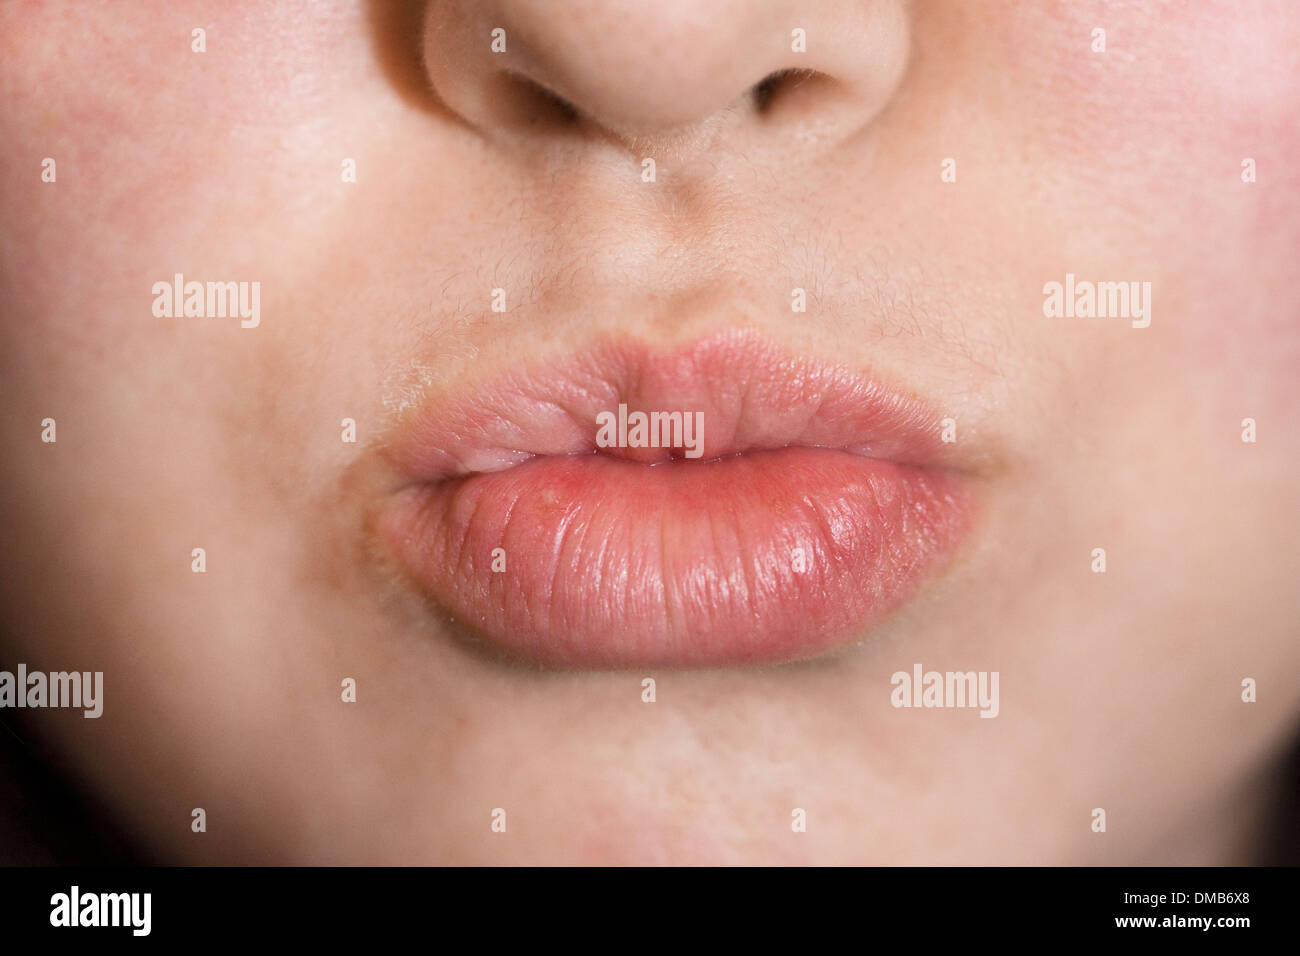 A human mouth ready to kiss Stock Photo